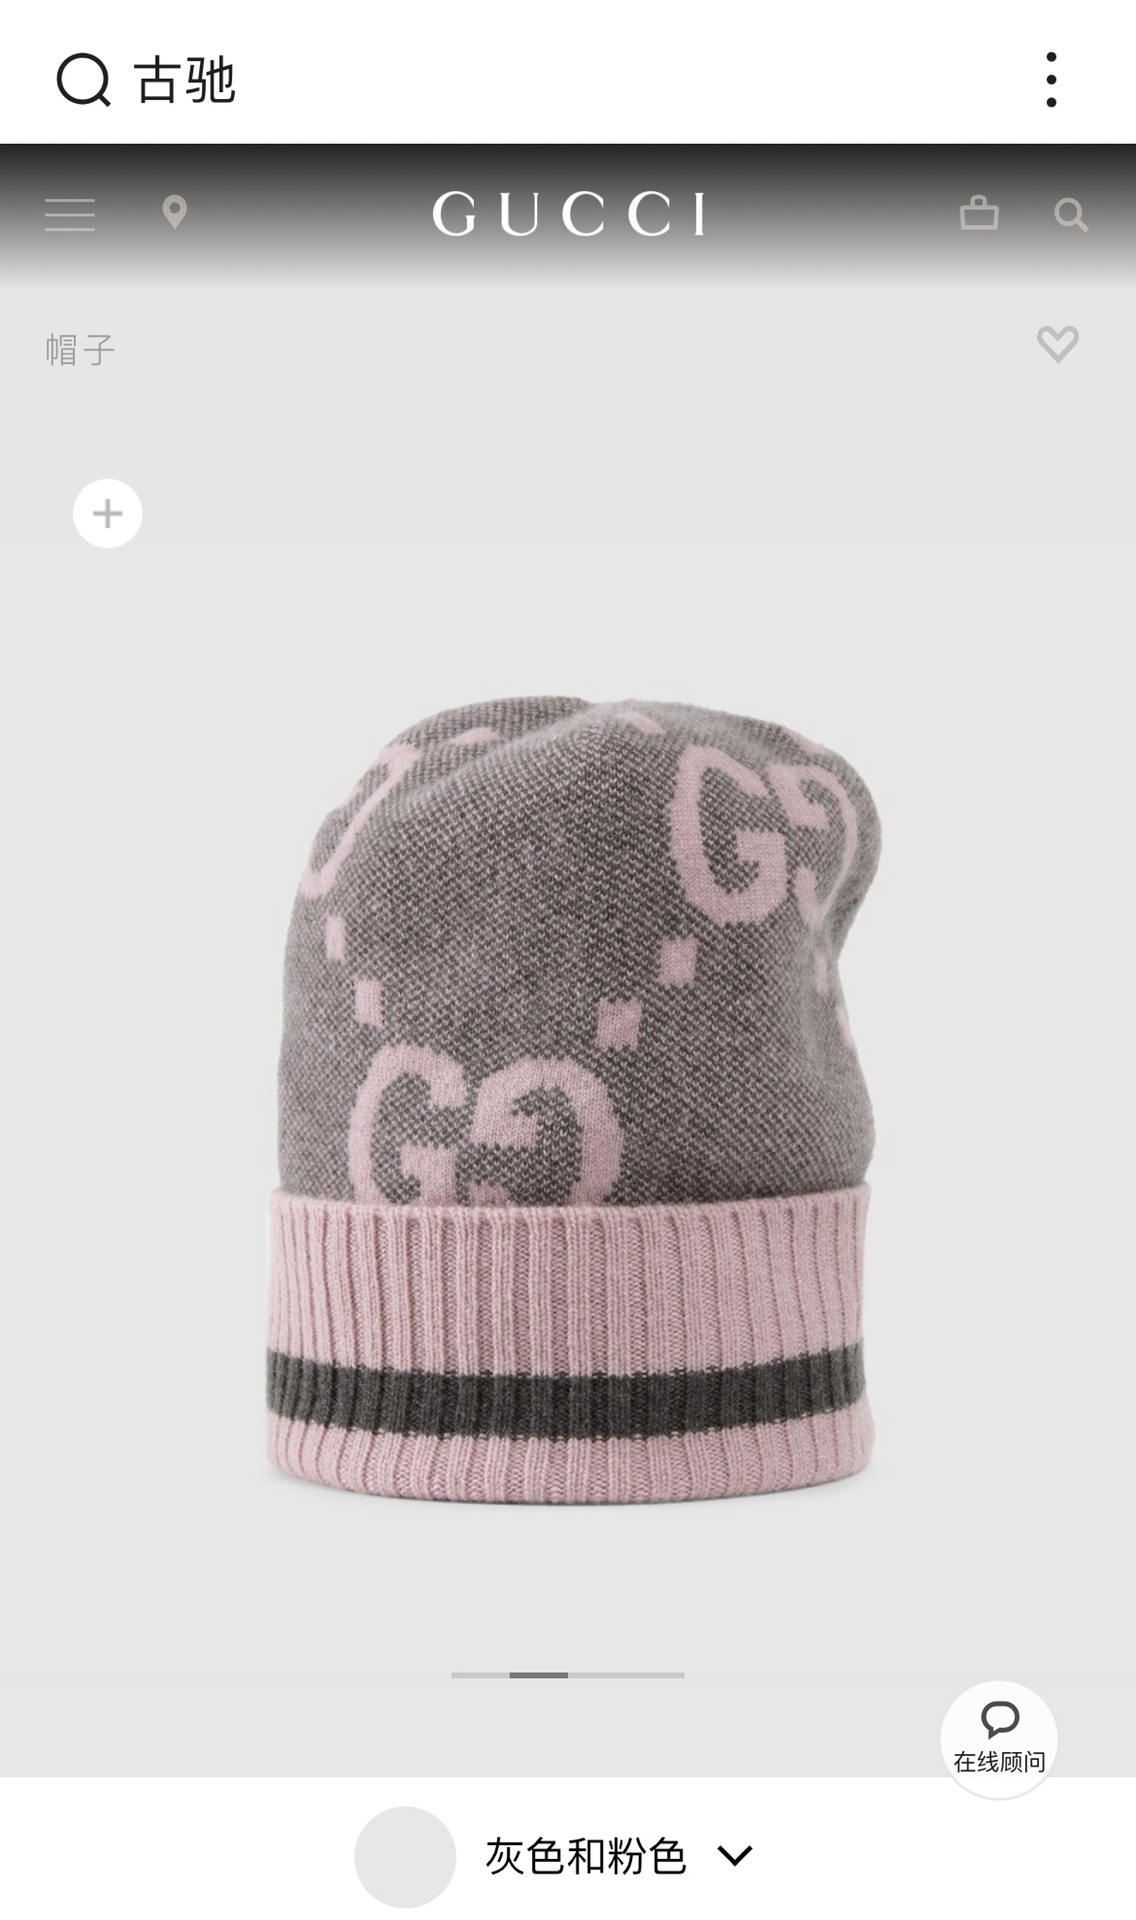 Gucci Hats Knitted Hat Knitting